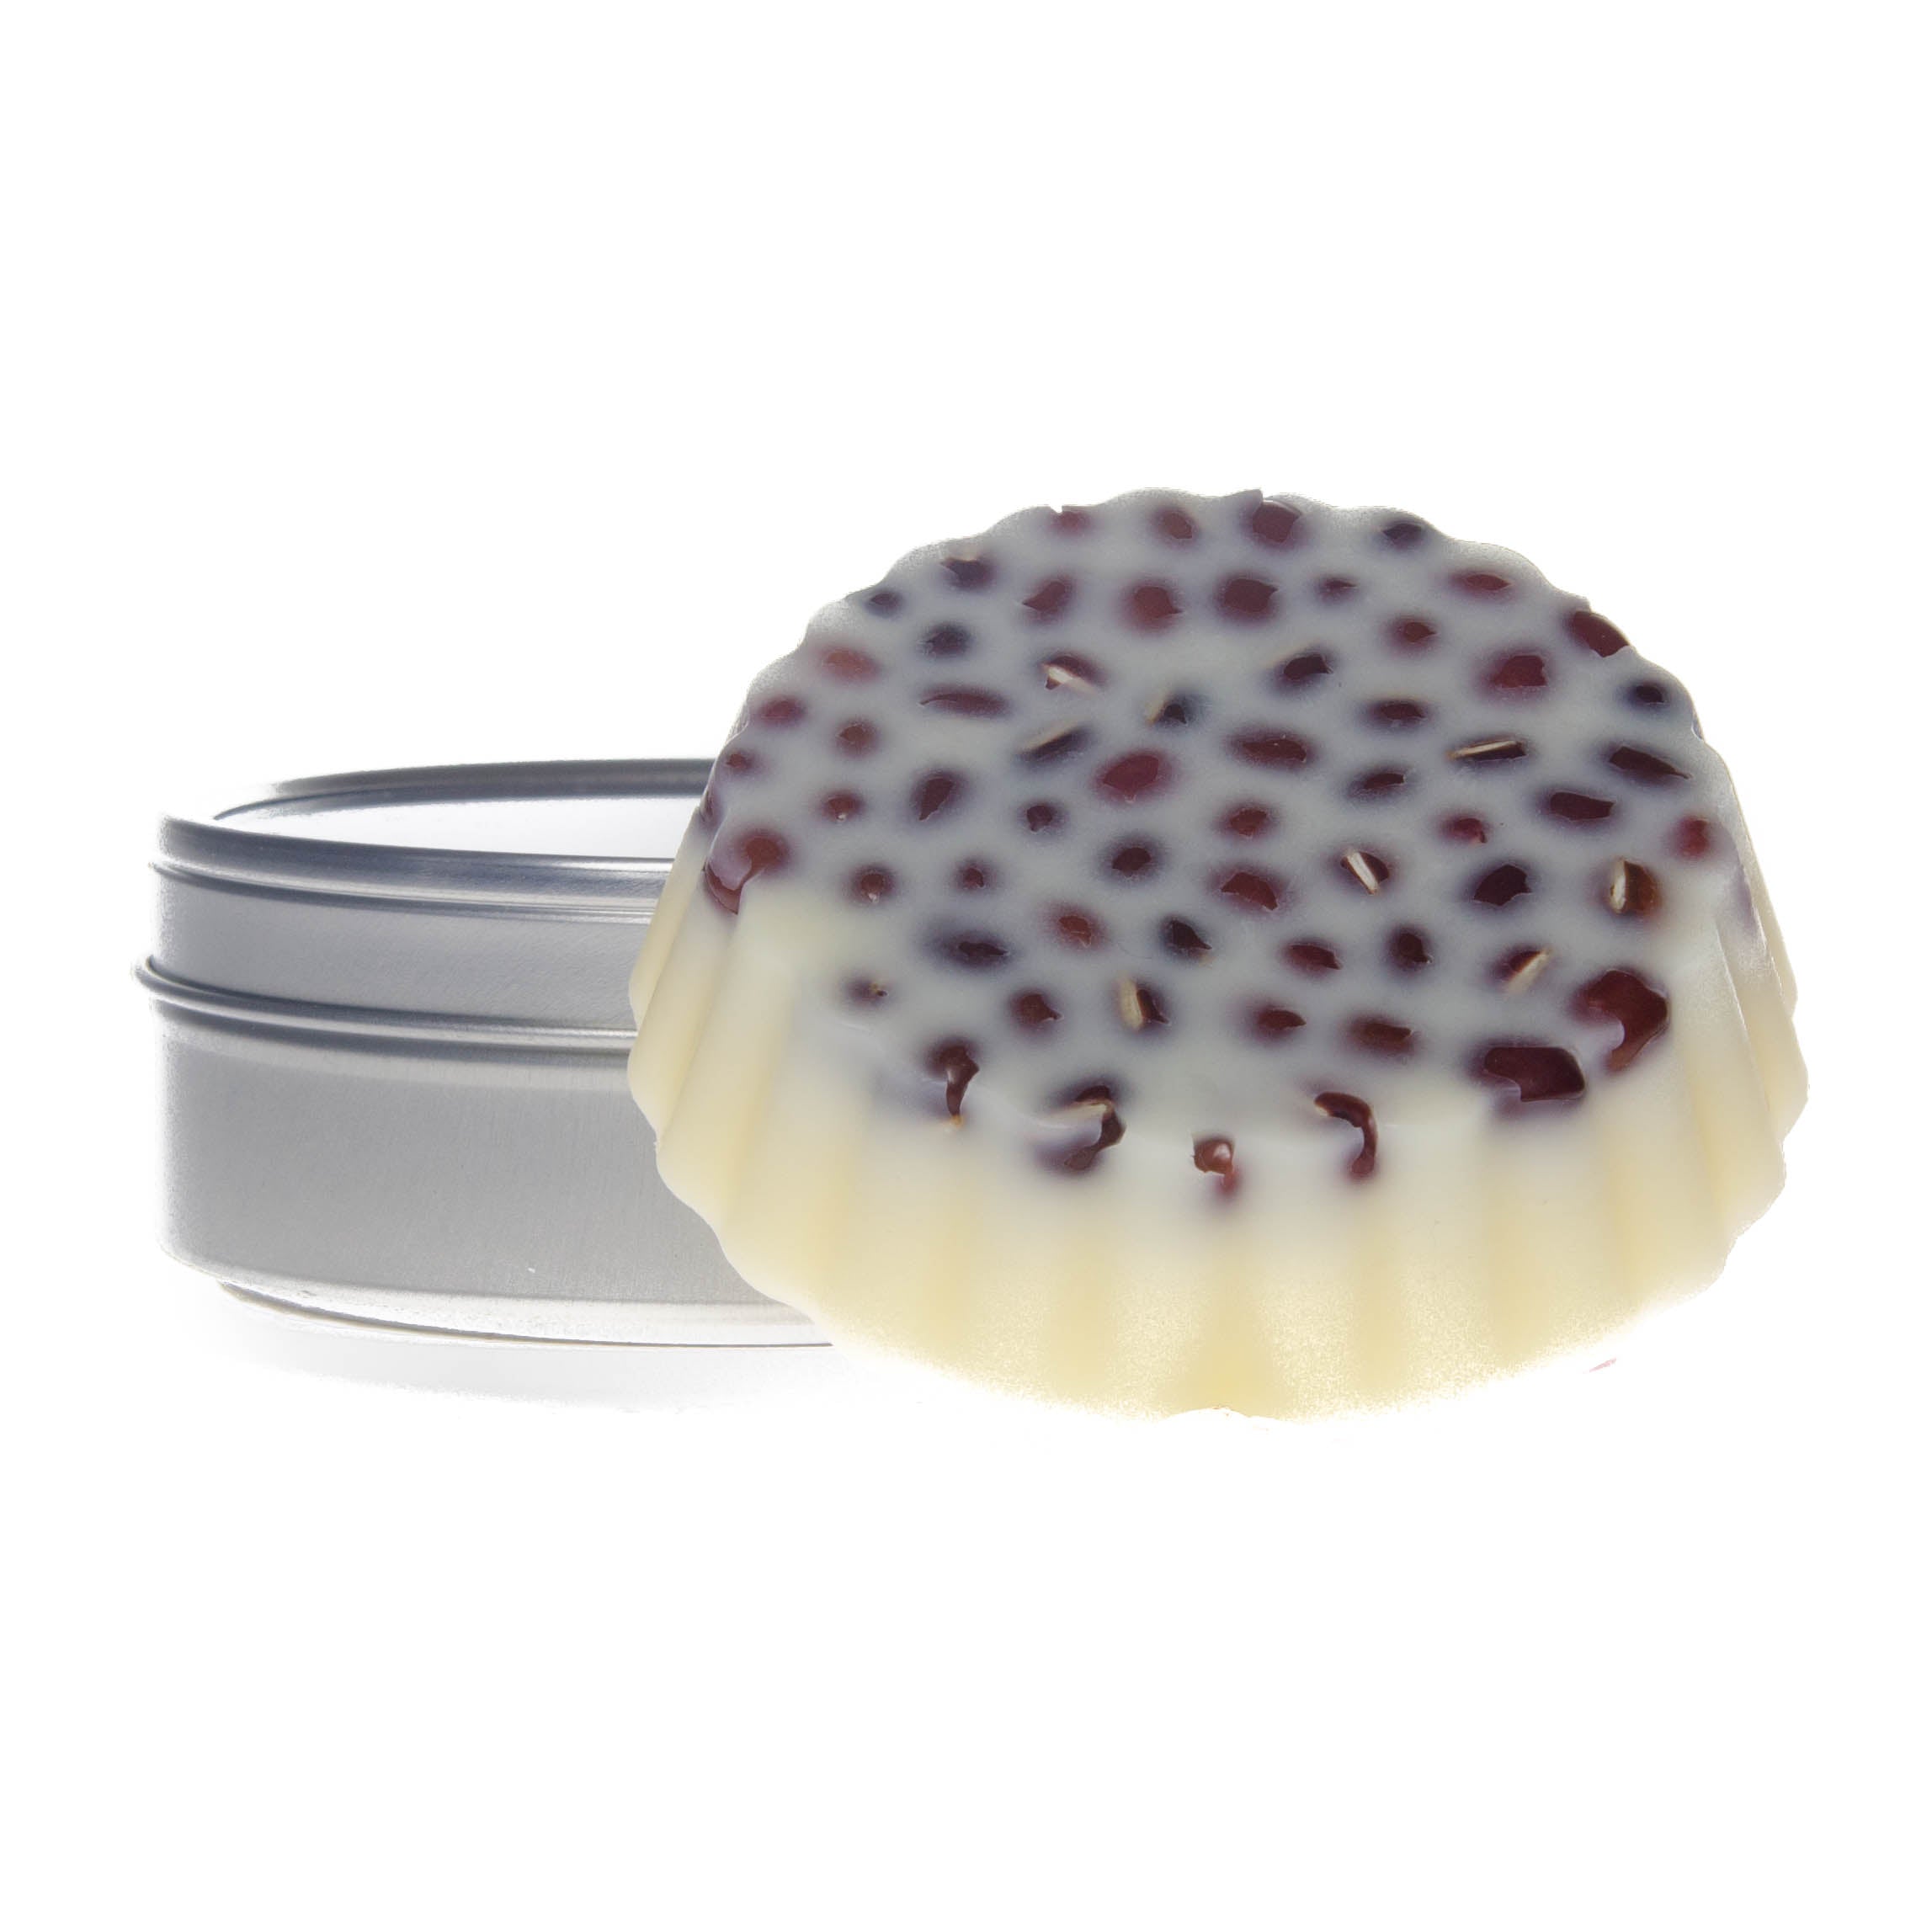 Footsie- Solid Lotion Bar for your Feet